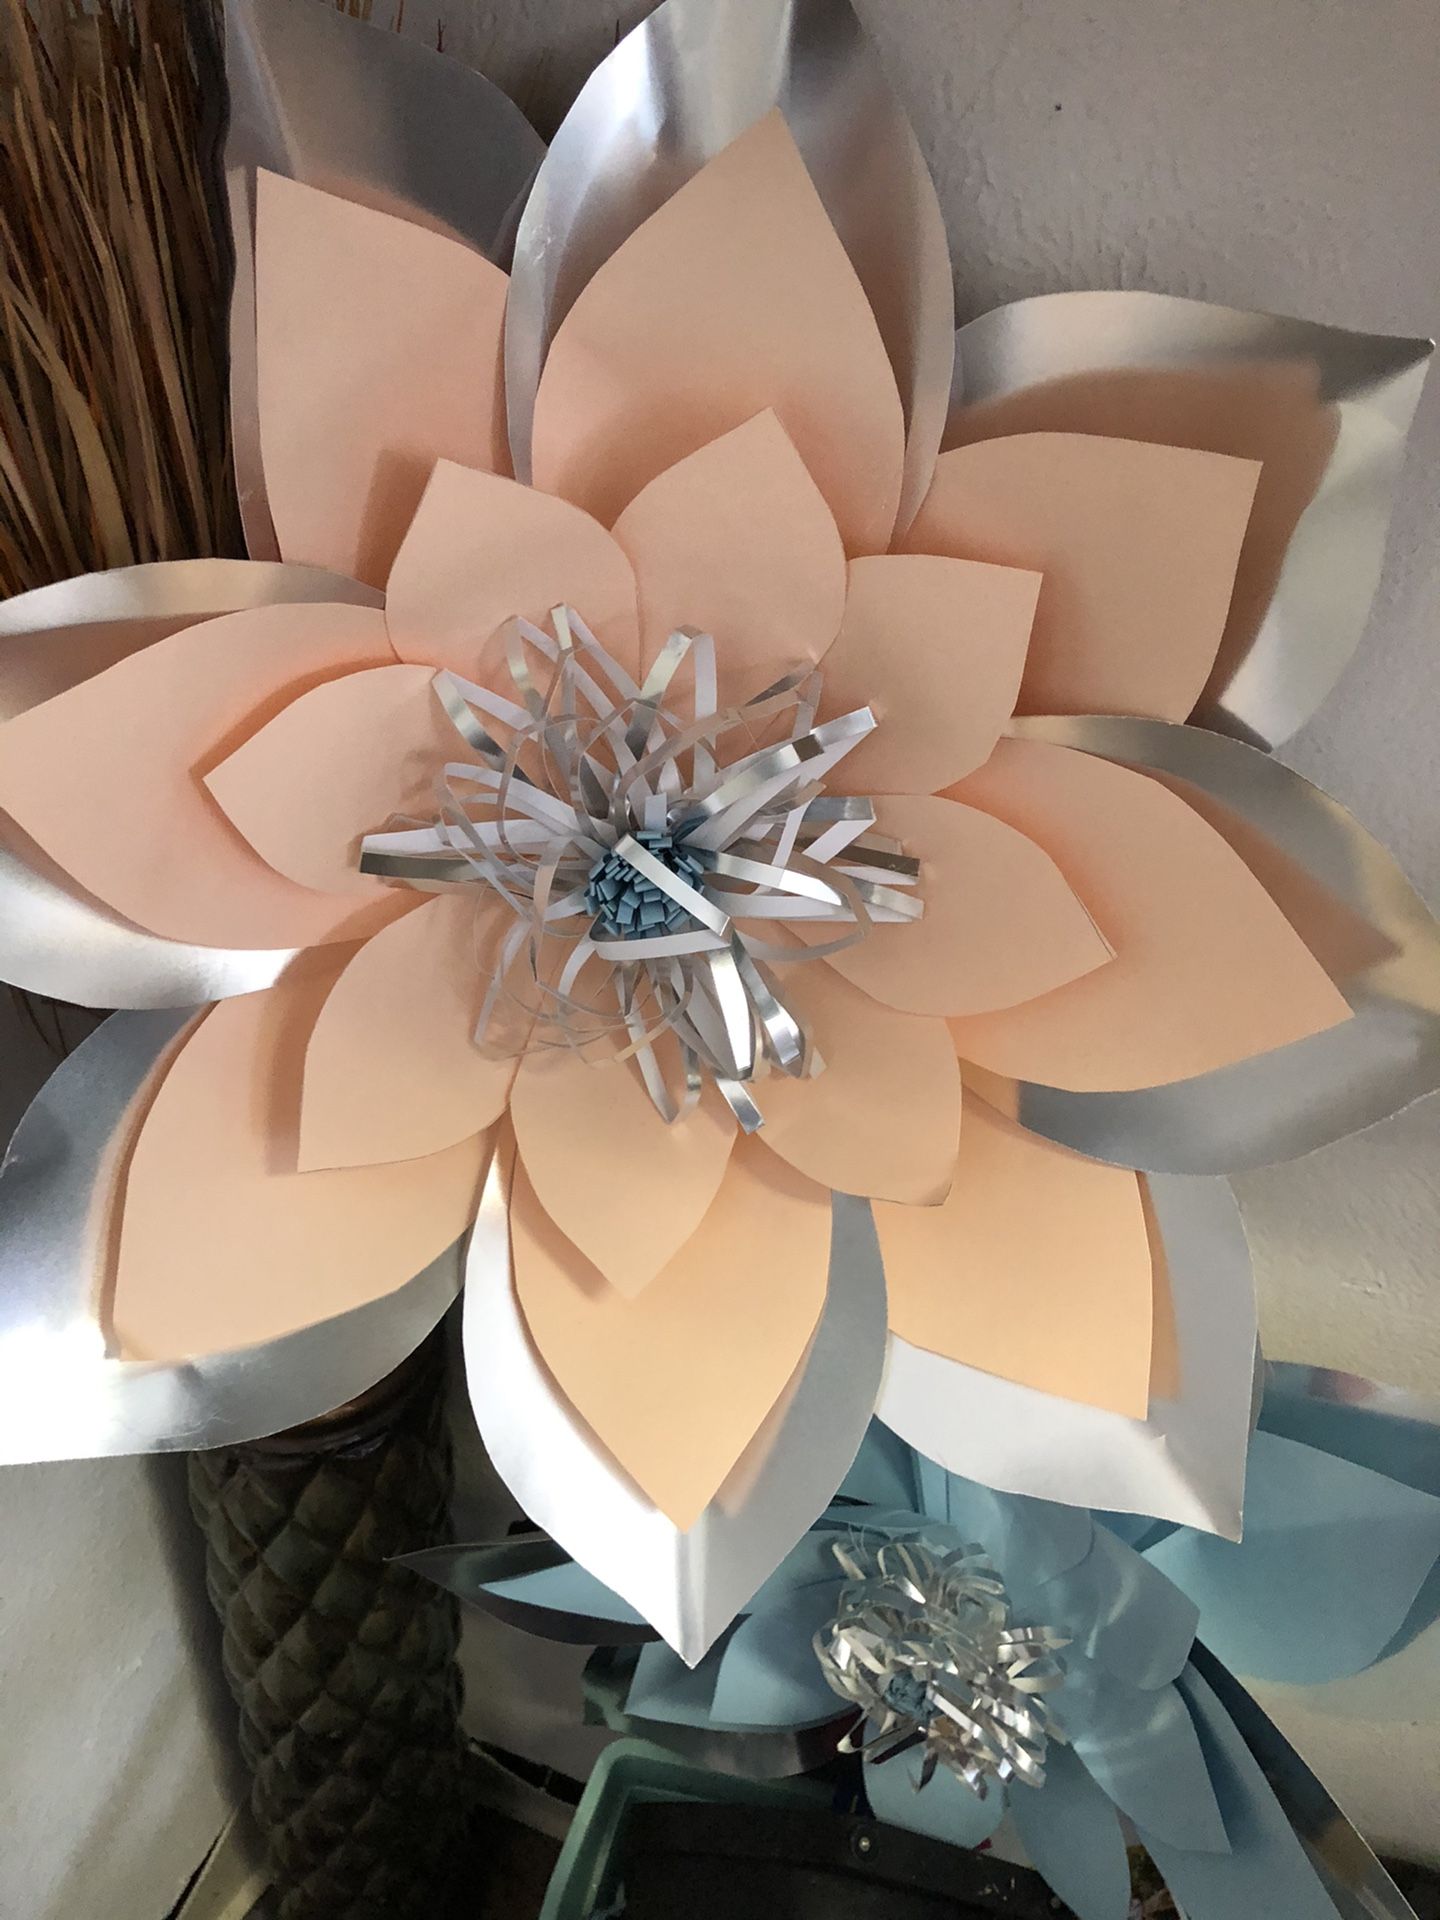 Peach and blue paper flowers